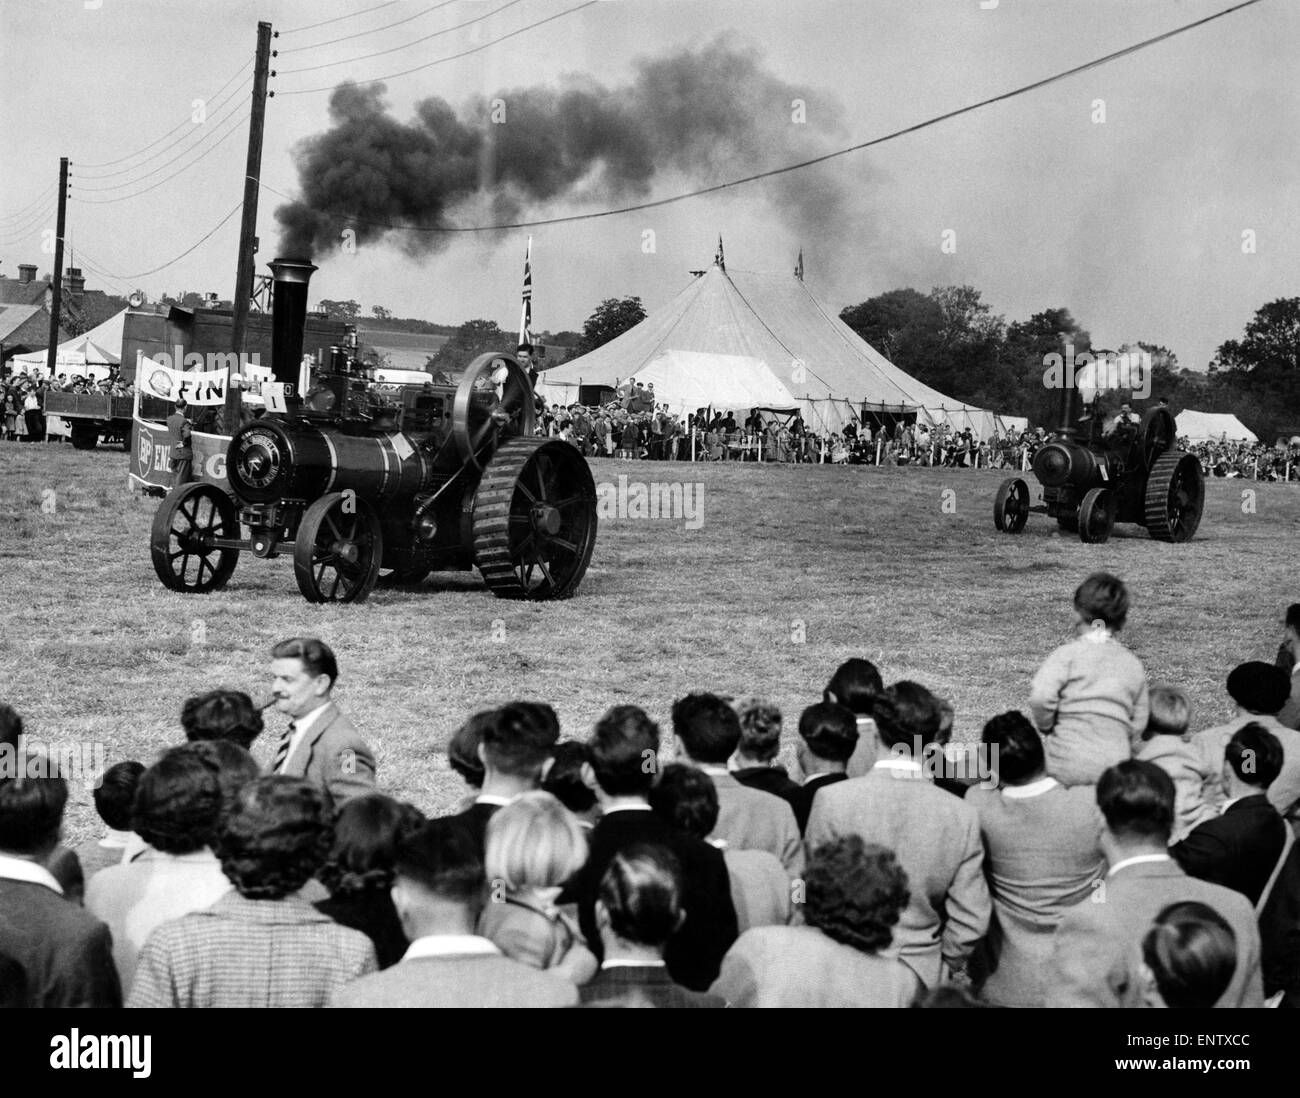 Traction Engines in race at Rally. A race between 10-ton traction engines, with policemen at the wheel, over a half-mile course, was one of the main attractions at a steam traction engine dally at Paris Hall Farm, Epping, the rally organized by the Epping police sports club in conjuction with the national traction engine club, was opened by the former light-heavyweight boxing champion of the world, Freddie mills. 1st October 1955 Stock Photo